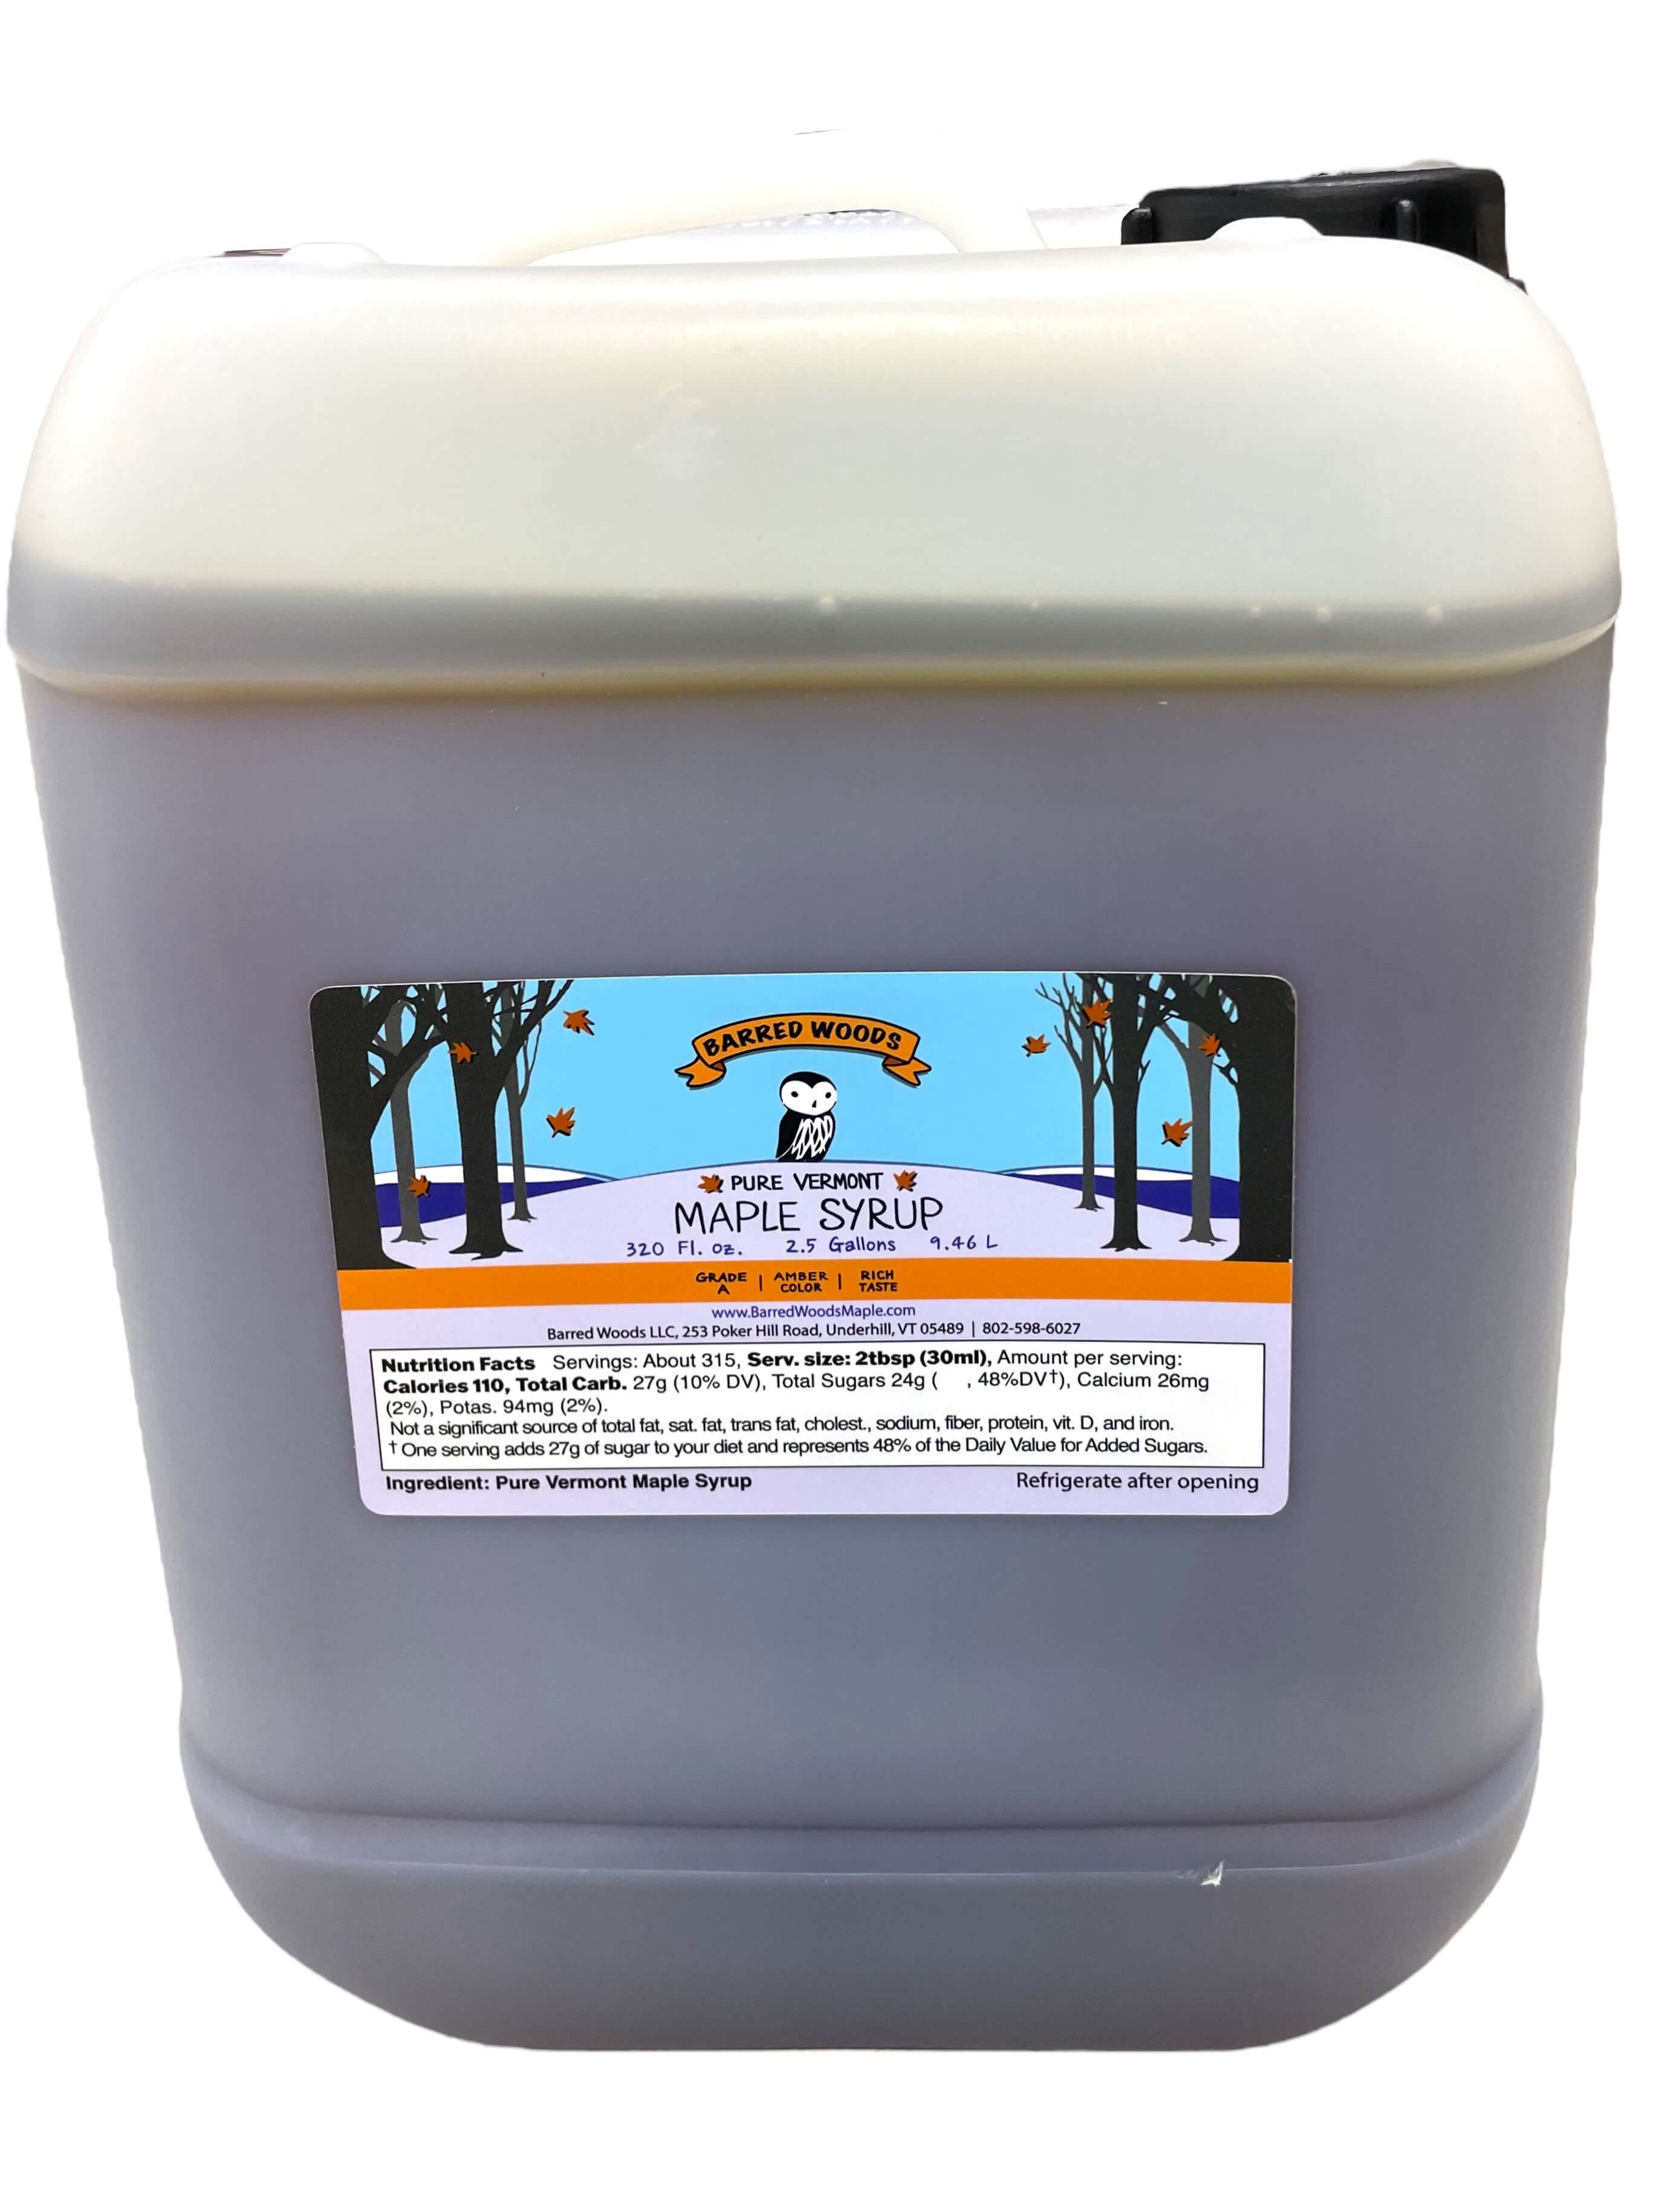 Bulk Maple Syrup and Wholesale Maple Syrup